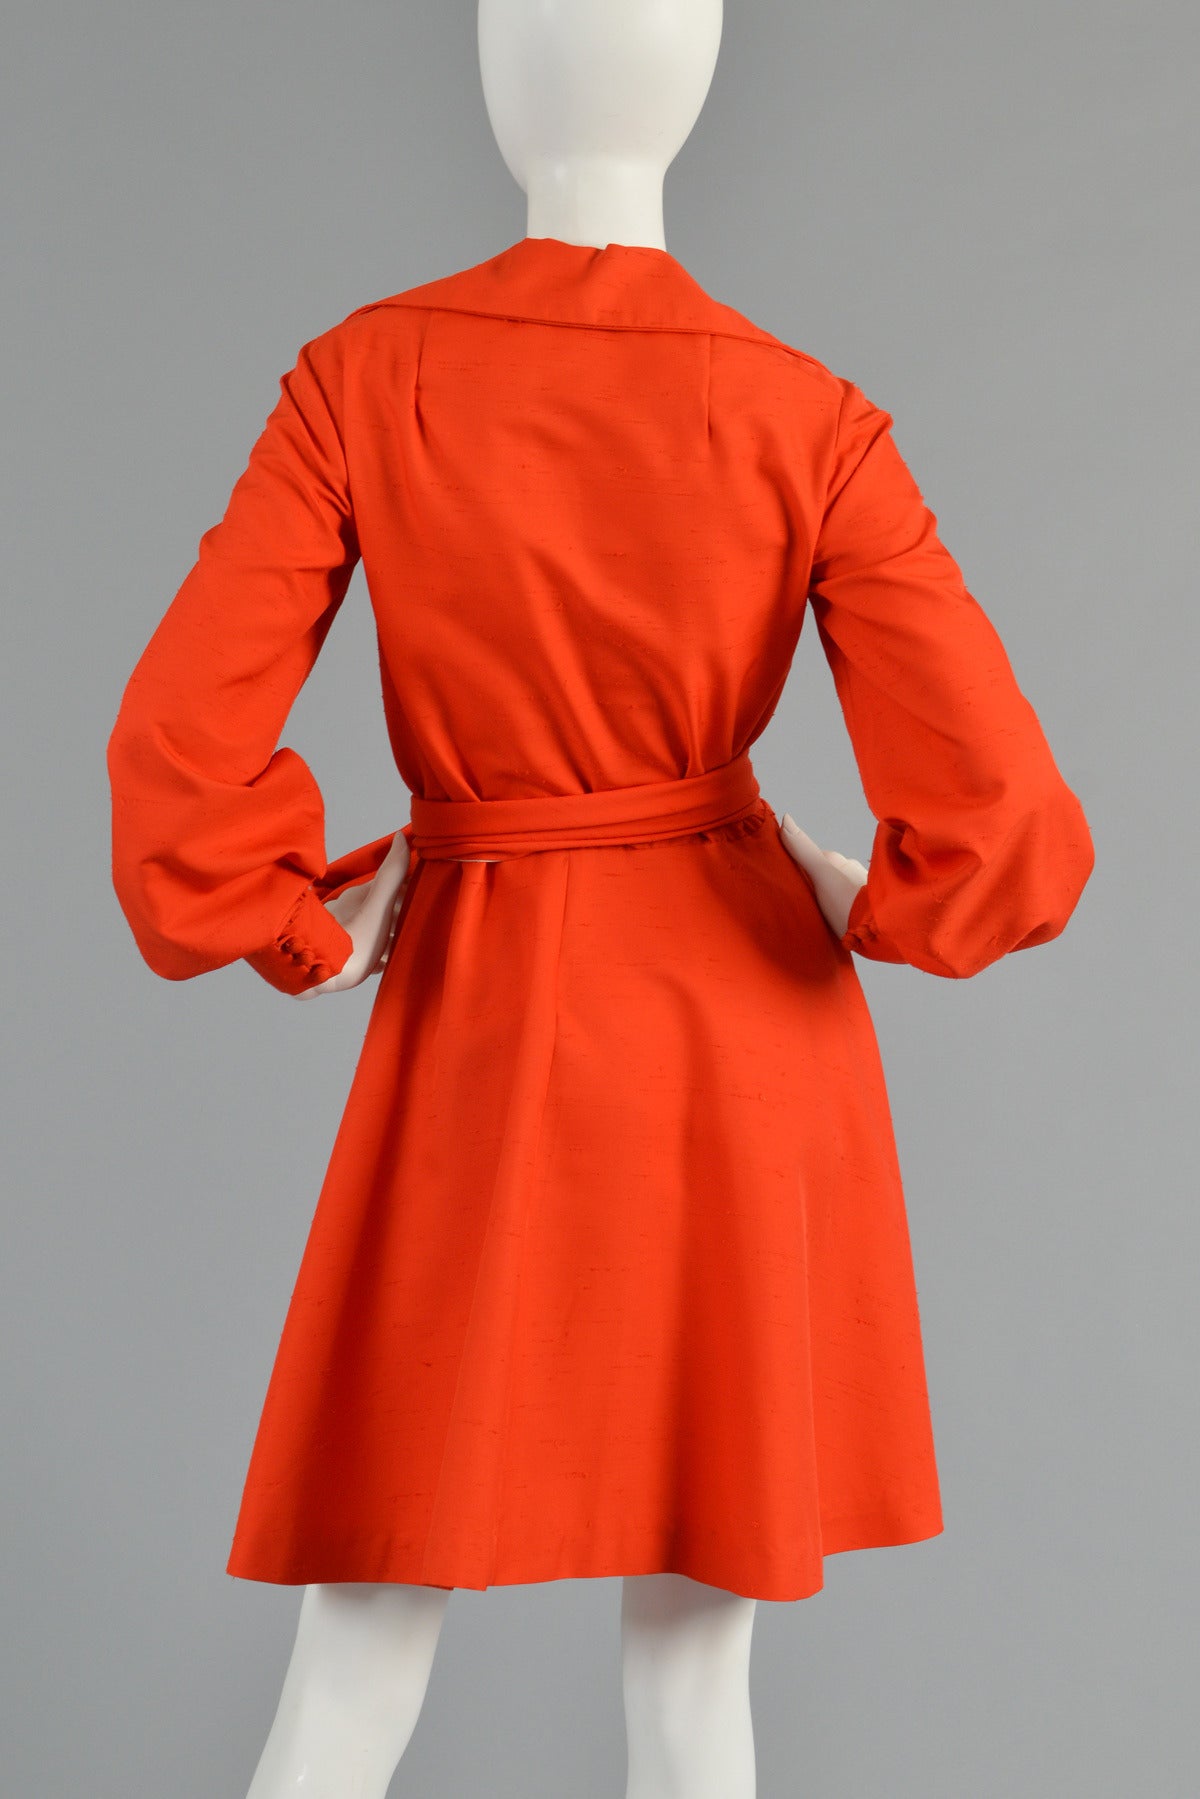 1970's Geoffrey Beene Silk Dress with Contrasting Sash For Sale 3